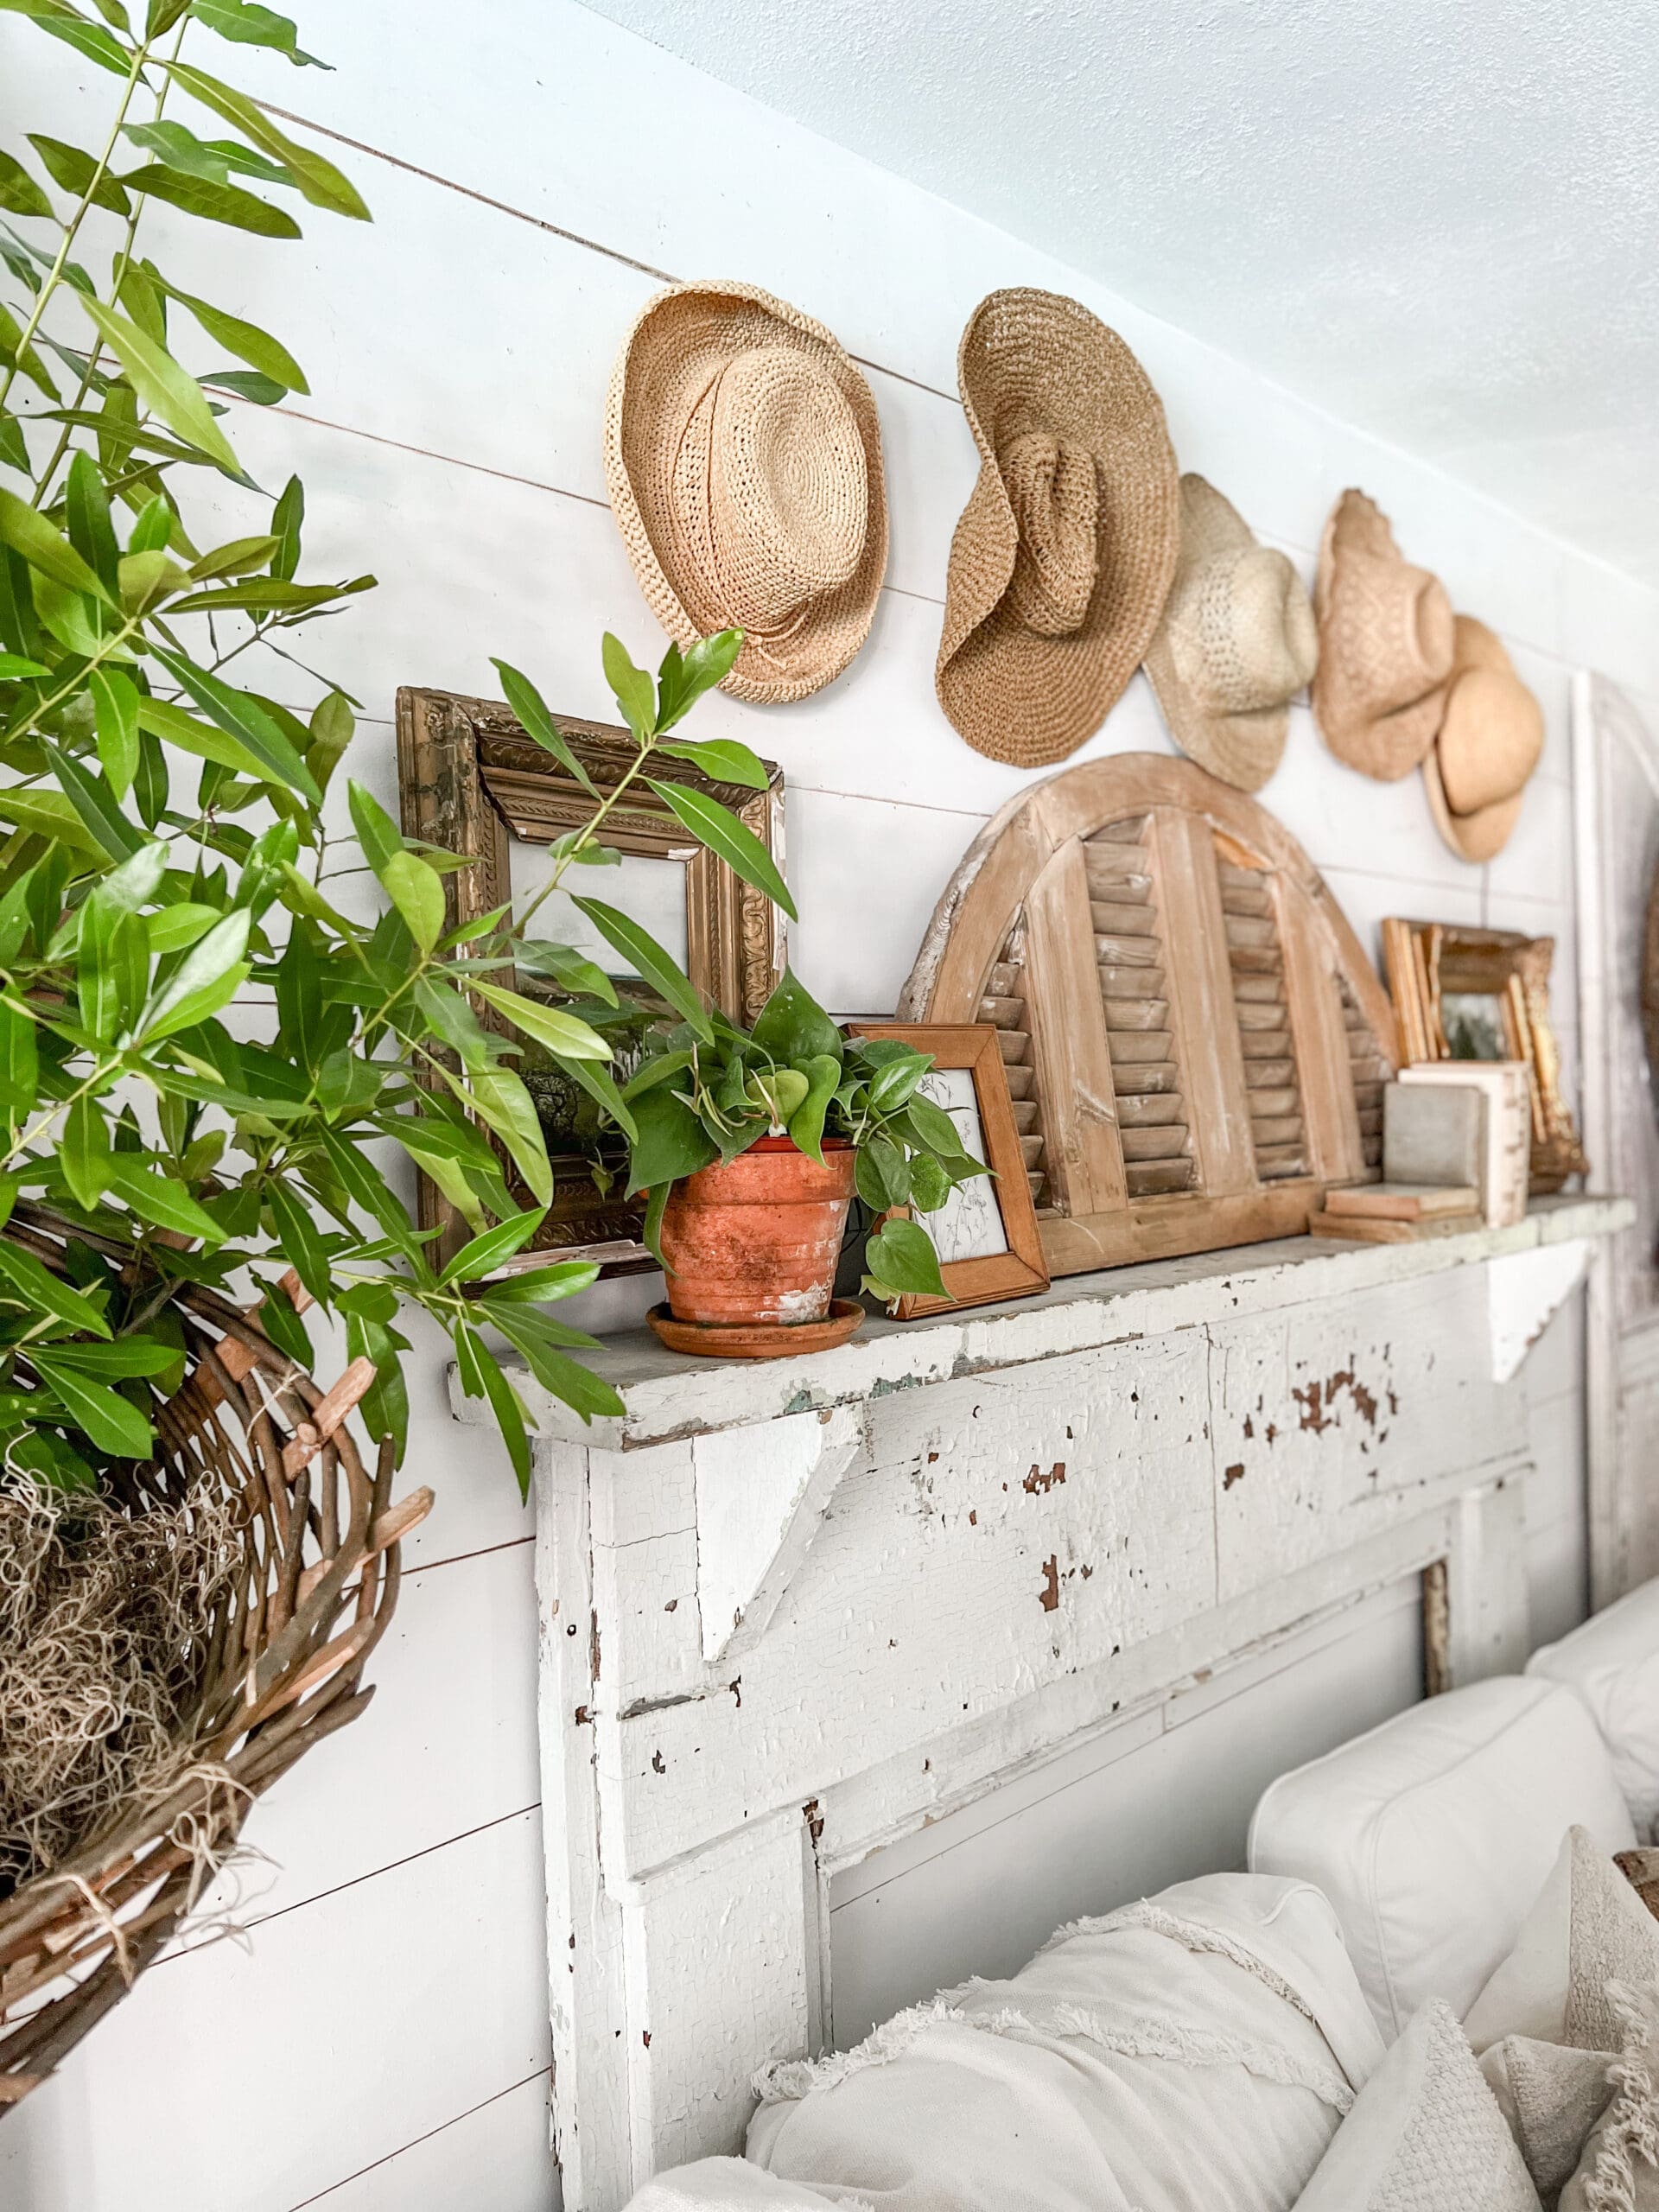 mantel with wicker baskets, and straw hats hanging behind it